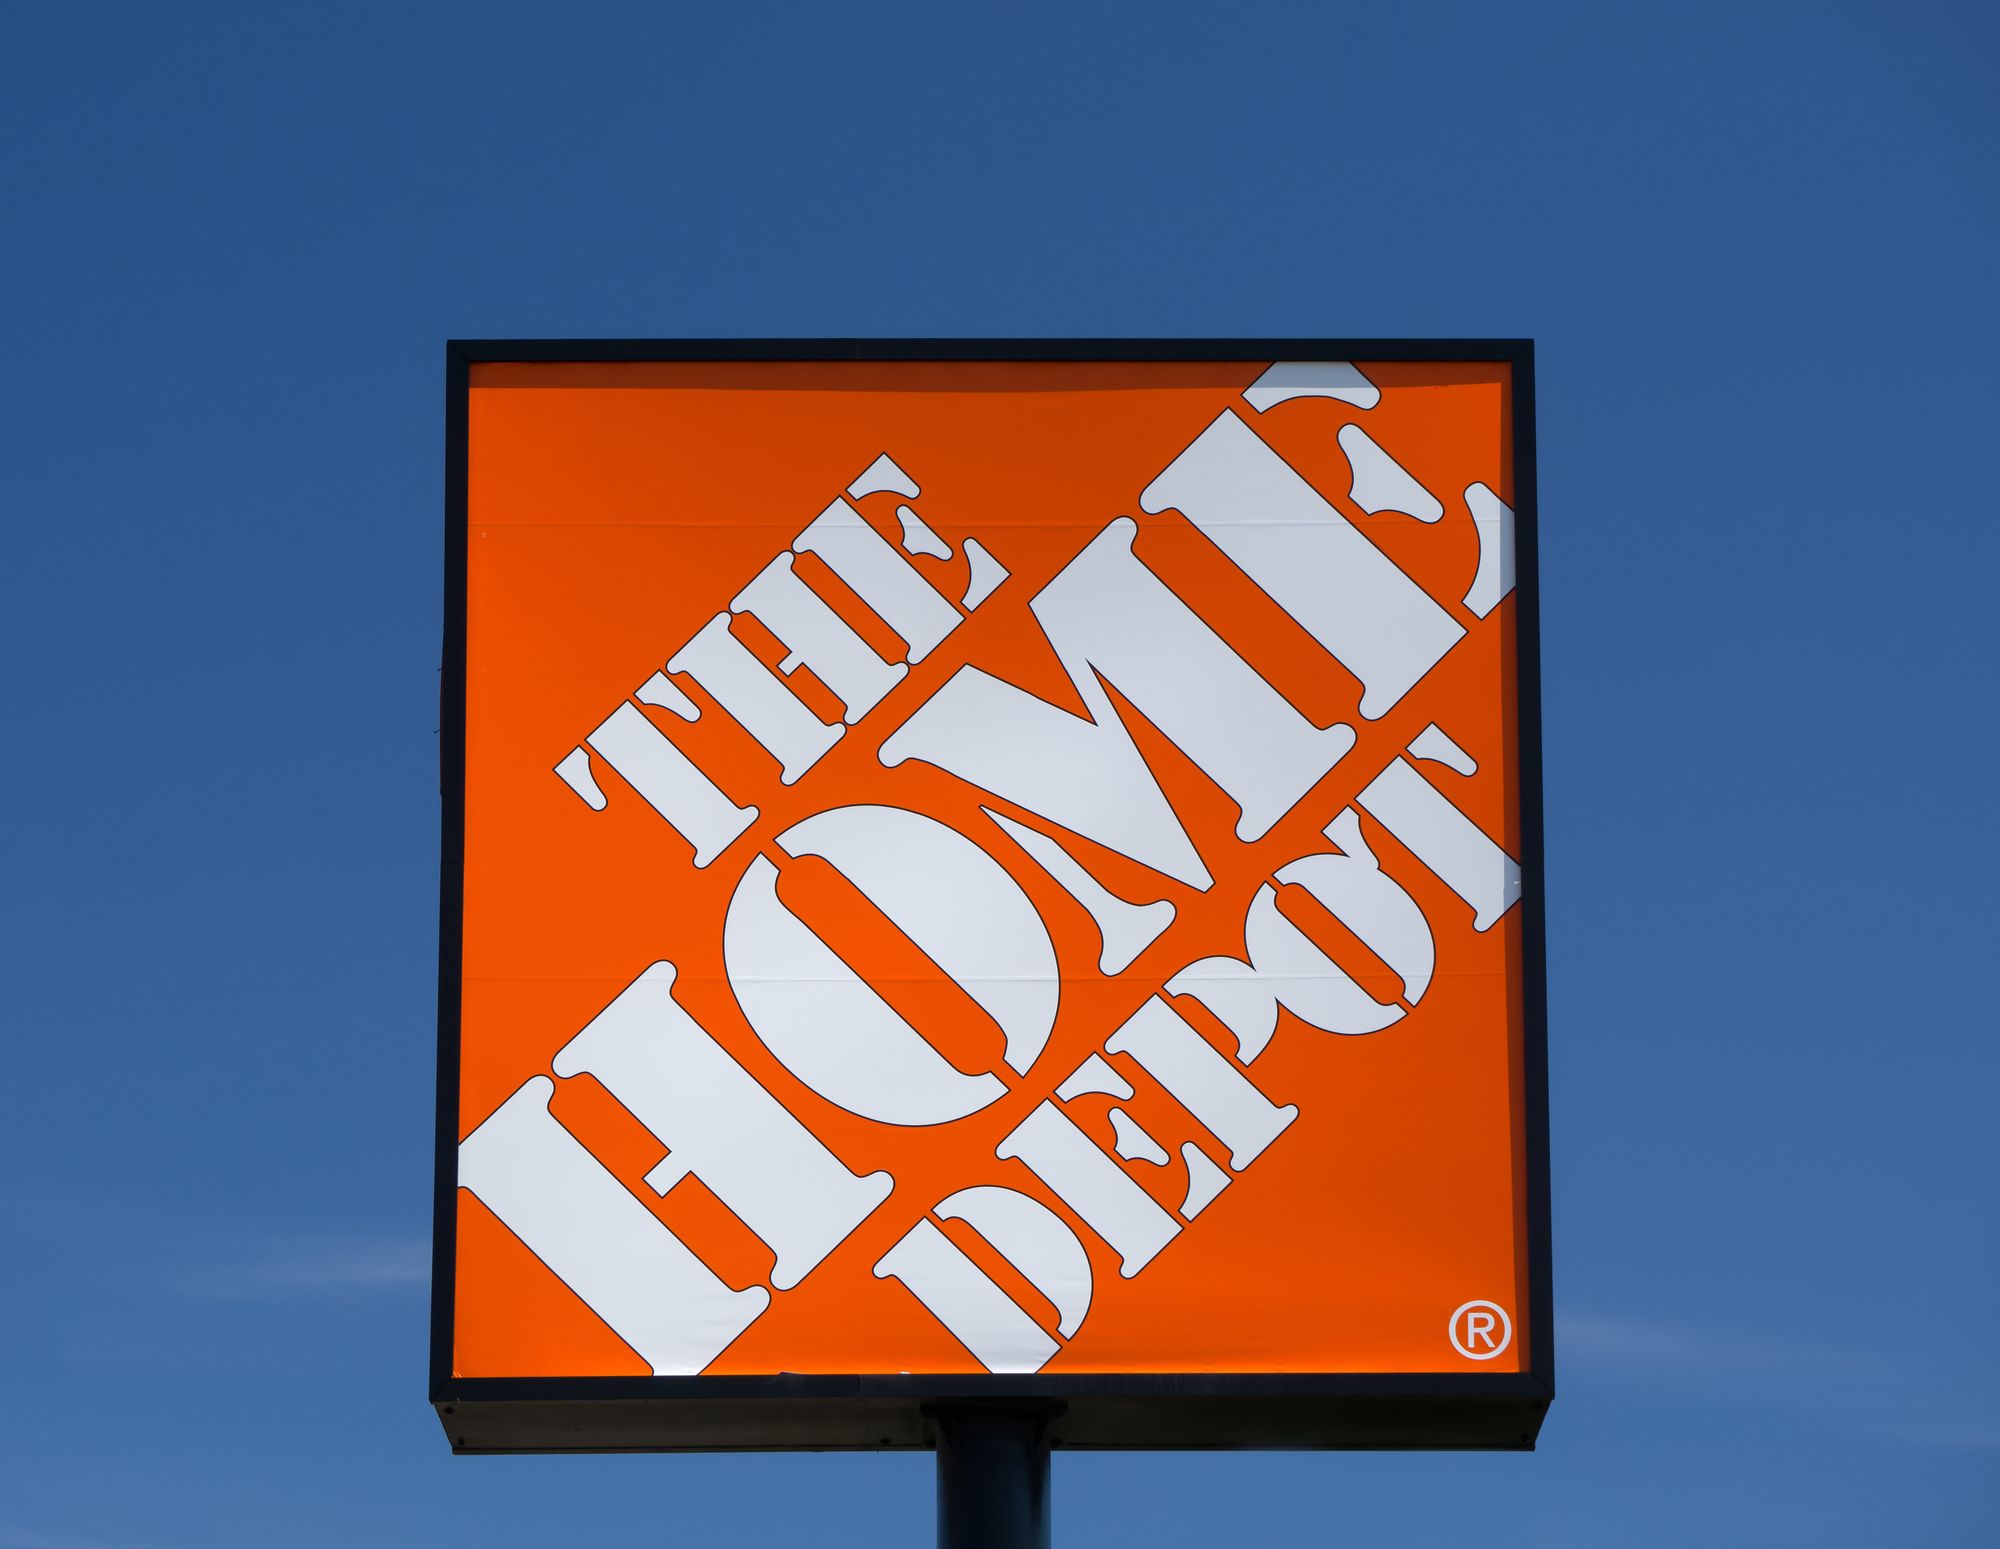 BLOOMINGTON, MN/USA - August 12, 2015: The Home Depot exterior. Home Depot is an American retailer of home improvement and construction products, supplies and services.